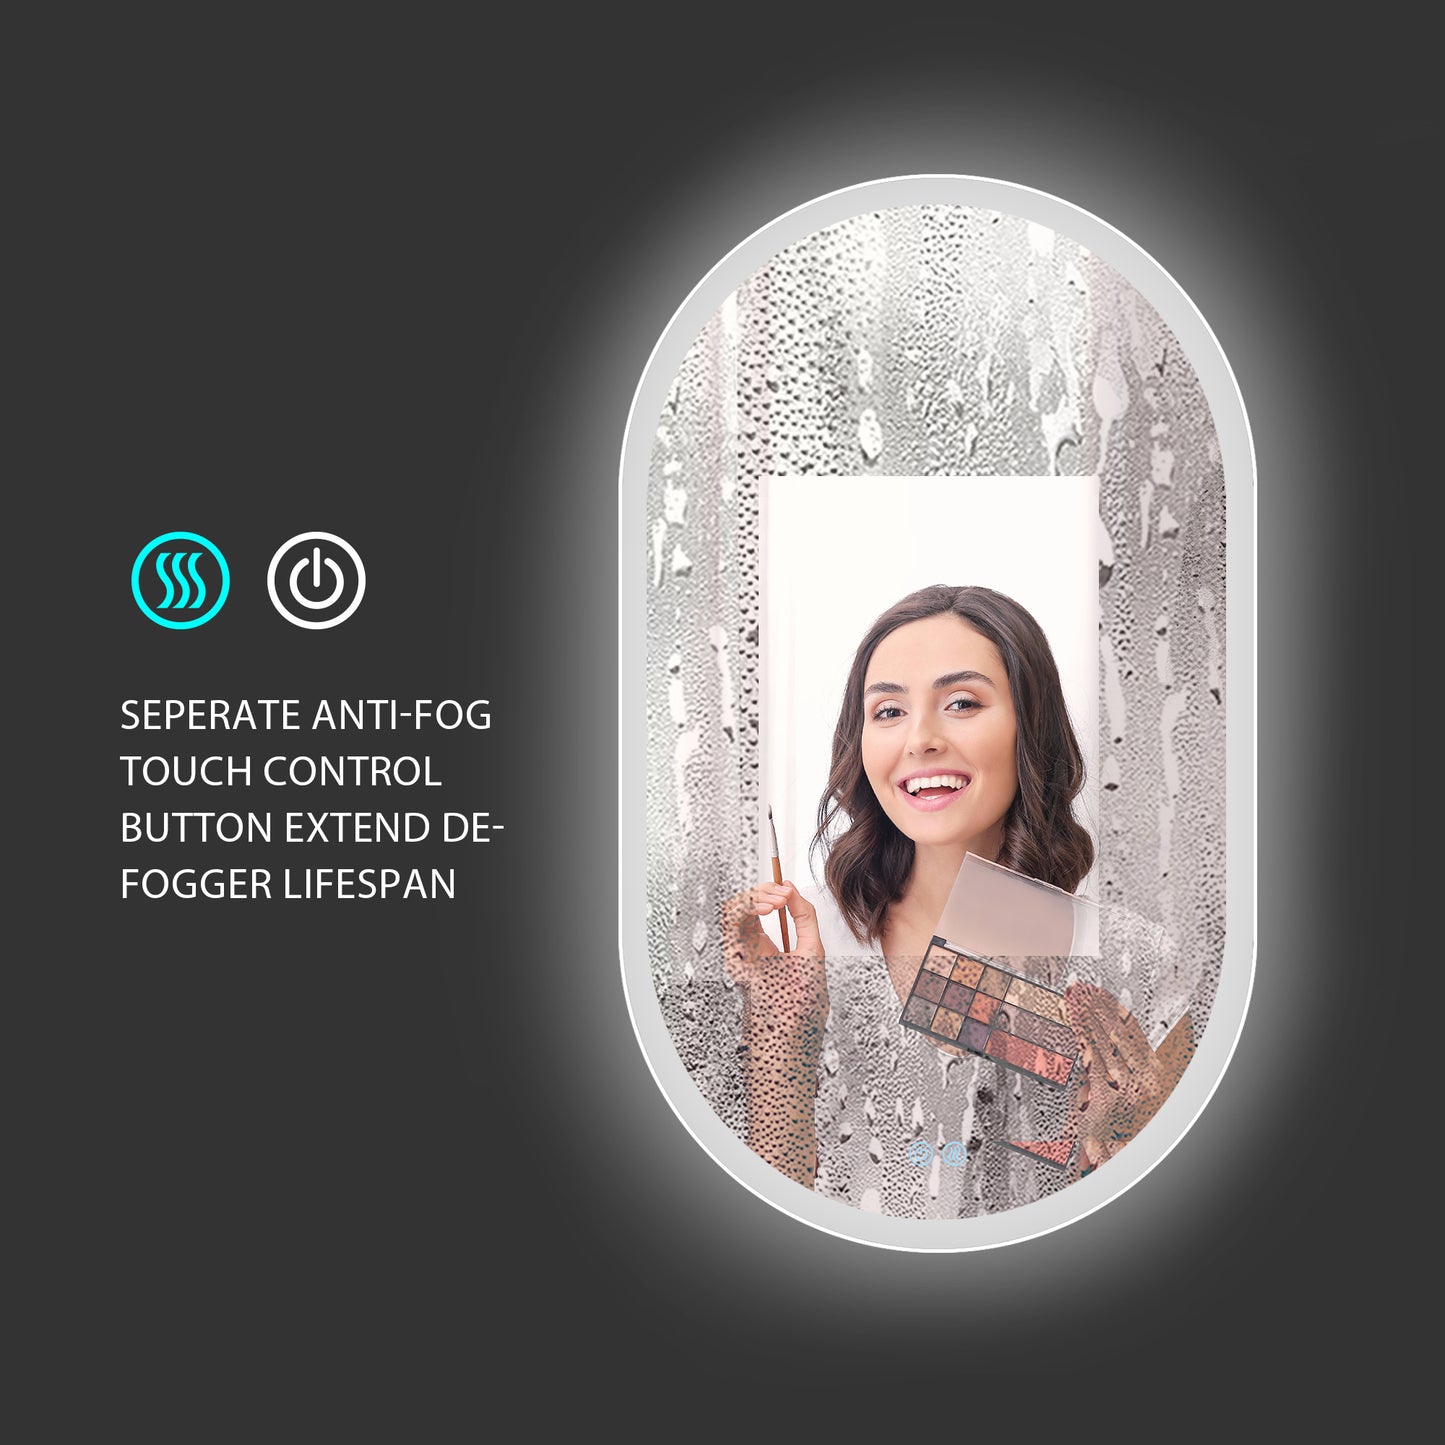 26X18 Inch Three-color Smart Bathroom Mirror with Light, Frameless Oval Smart Vanity Mirror Hanging Vertically